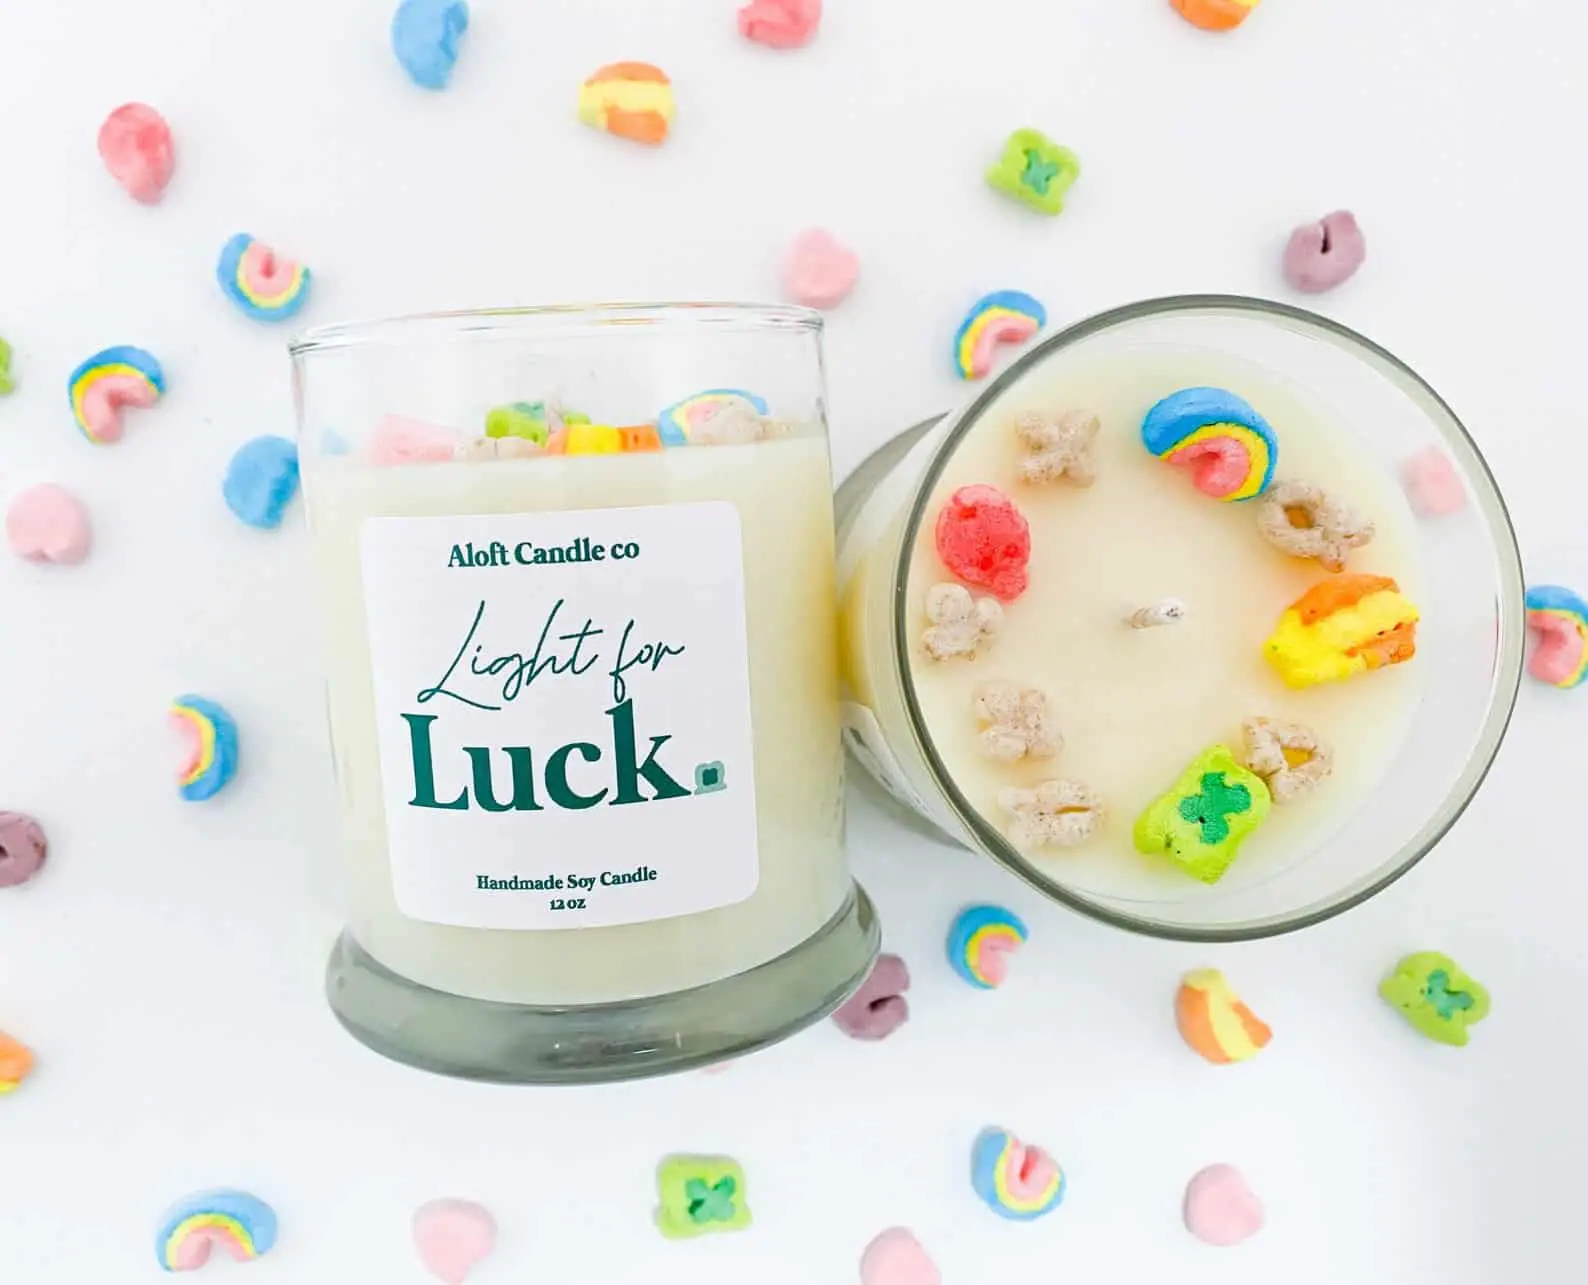 soy jar candle with lucky charms around it